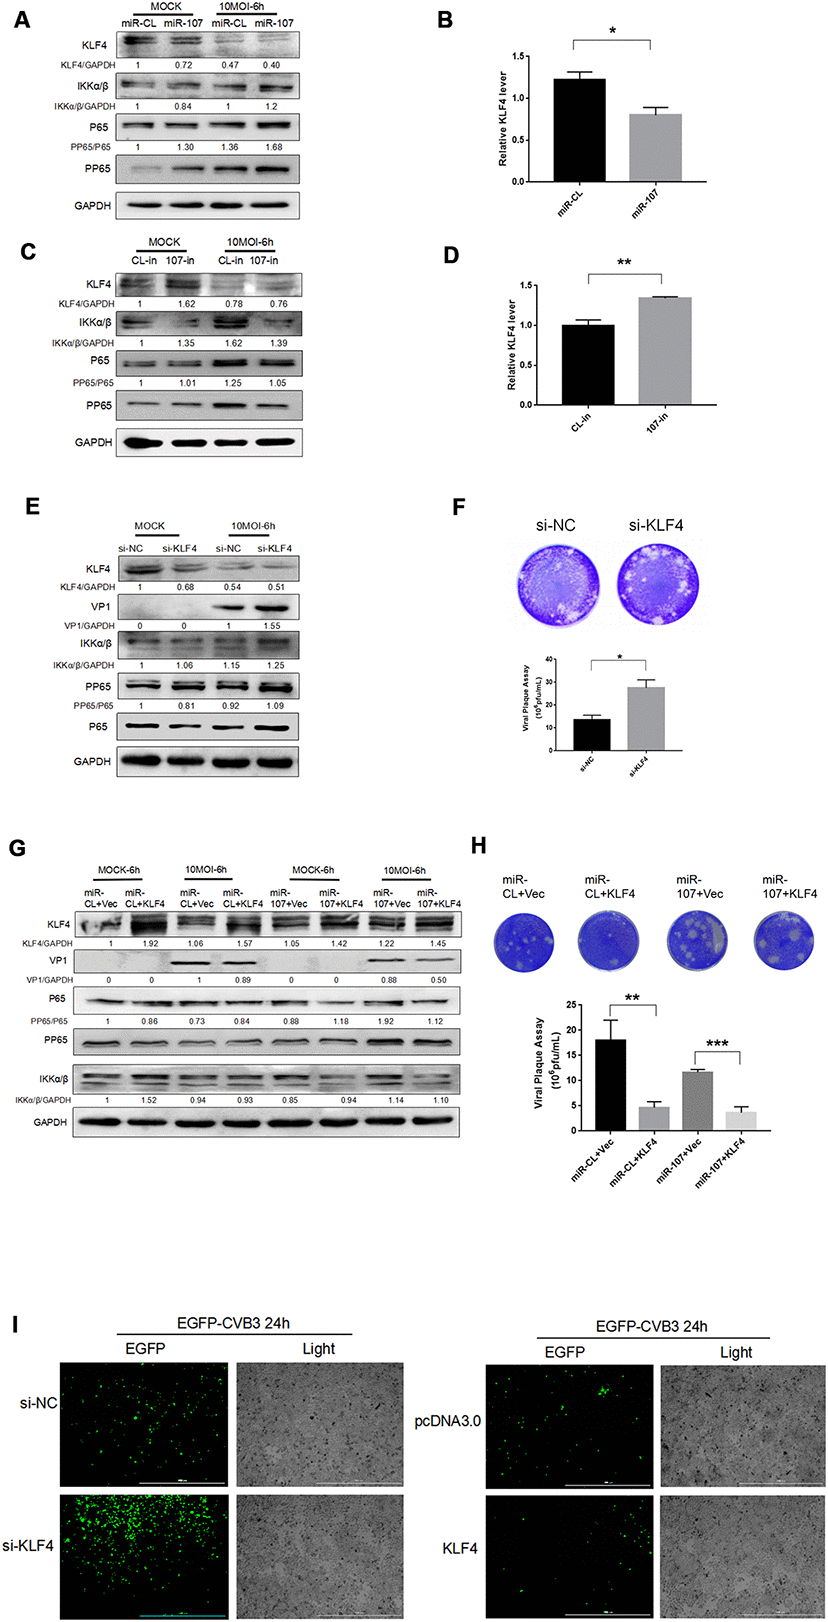 (A–D) MiR-107 targeted KLF4, enhanced phosphorylation of NFκB and promoted replication of CVB3. Hela cells was infected with CVB3 after transfection with miRNA mimics or inhibitors. Cellular proteins were detected by western blot. RT-qPCR was performed to determine the mRNA level of KLF4. (E) KLF4 knockdown facilitated the phosphorylation of NFκB. Hela cells which were initially transfected with KLF4 siRNA were infected with CVB3. Protein expressions of NFκB and p-NFκB were detected by western blot analysis. (F, H) Viral titers were determined by plaque assay. (G) The overexpression of KLF4 partially suppressed the promoting effect of miR-107 on VP-1 synthesis and the phosphorylation of NFκB. Hela cells that were co-transfected with miRNA mimics and KLF4 plasmids or empty vector (Vec) were infected with CVB3 afterward. The activity of NFκB signaling was analyzed by western blot. (I) The replication level of EGFP-Iabeled CVB3 was observed in Hela cells which had been transfected with si-KLF4 or pcDNA-KLF4 (magnification, 4×).